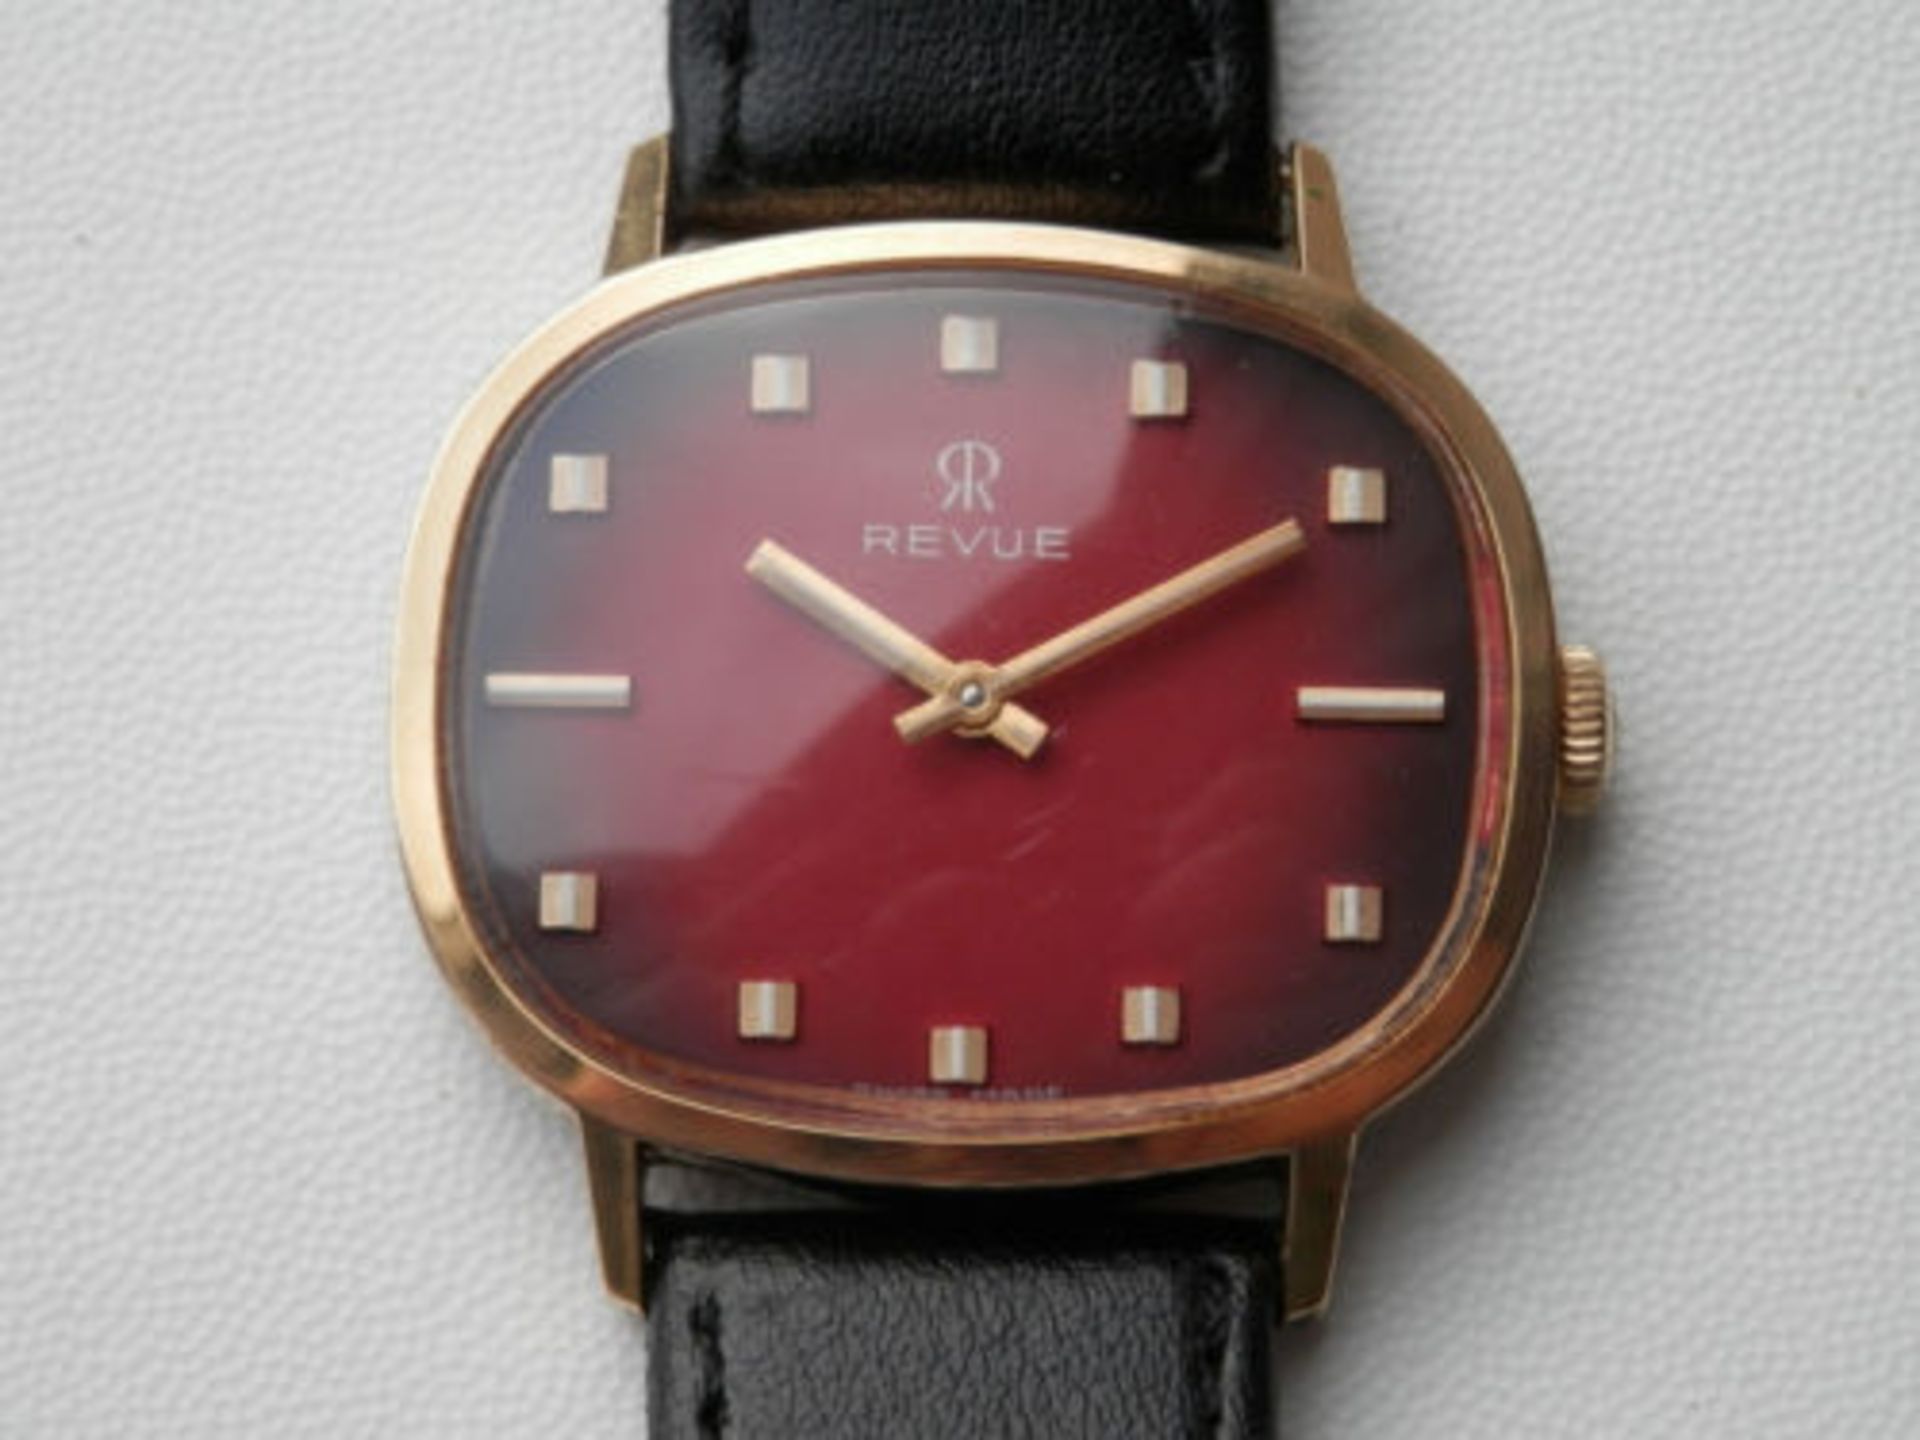 RRP £200+ RARE WORKING 1960S REVUE THOMMEN SWISS 17 JEWEL HAND WIND WATCH, CHERRY DIAL. - Image 4 of 12